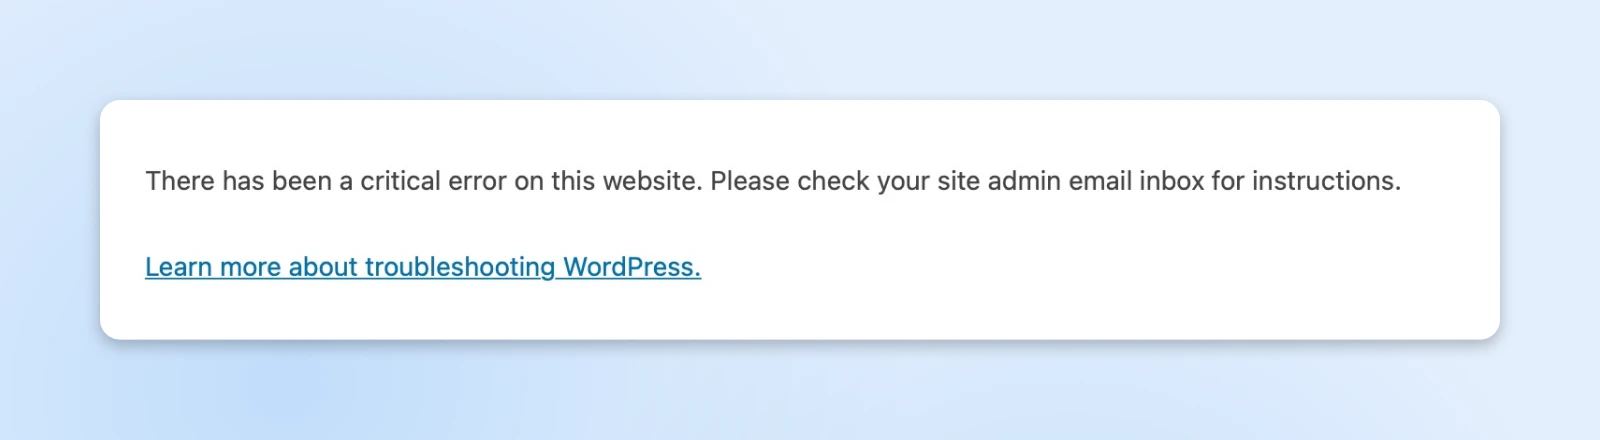 WordPress error message stating "There has been a critical error on this website" with link for troubleshooting.